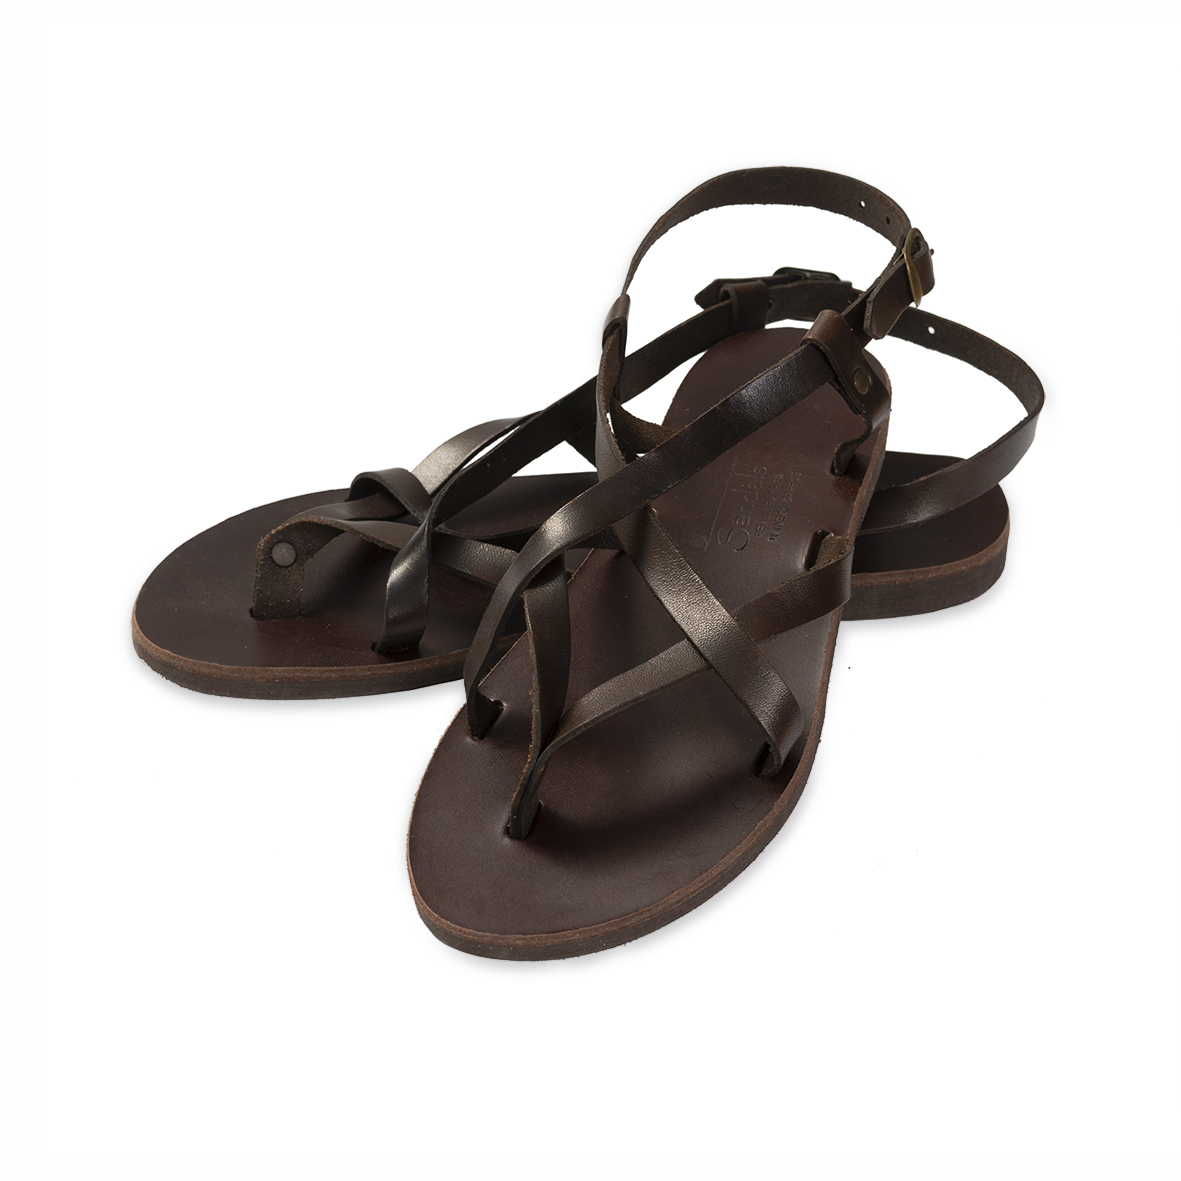 Handmade Brown Leather Sandals, Womens Sandals, Leather Sandals